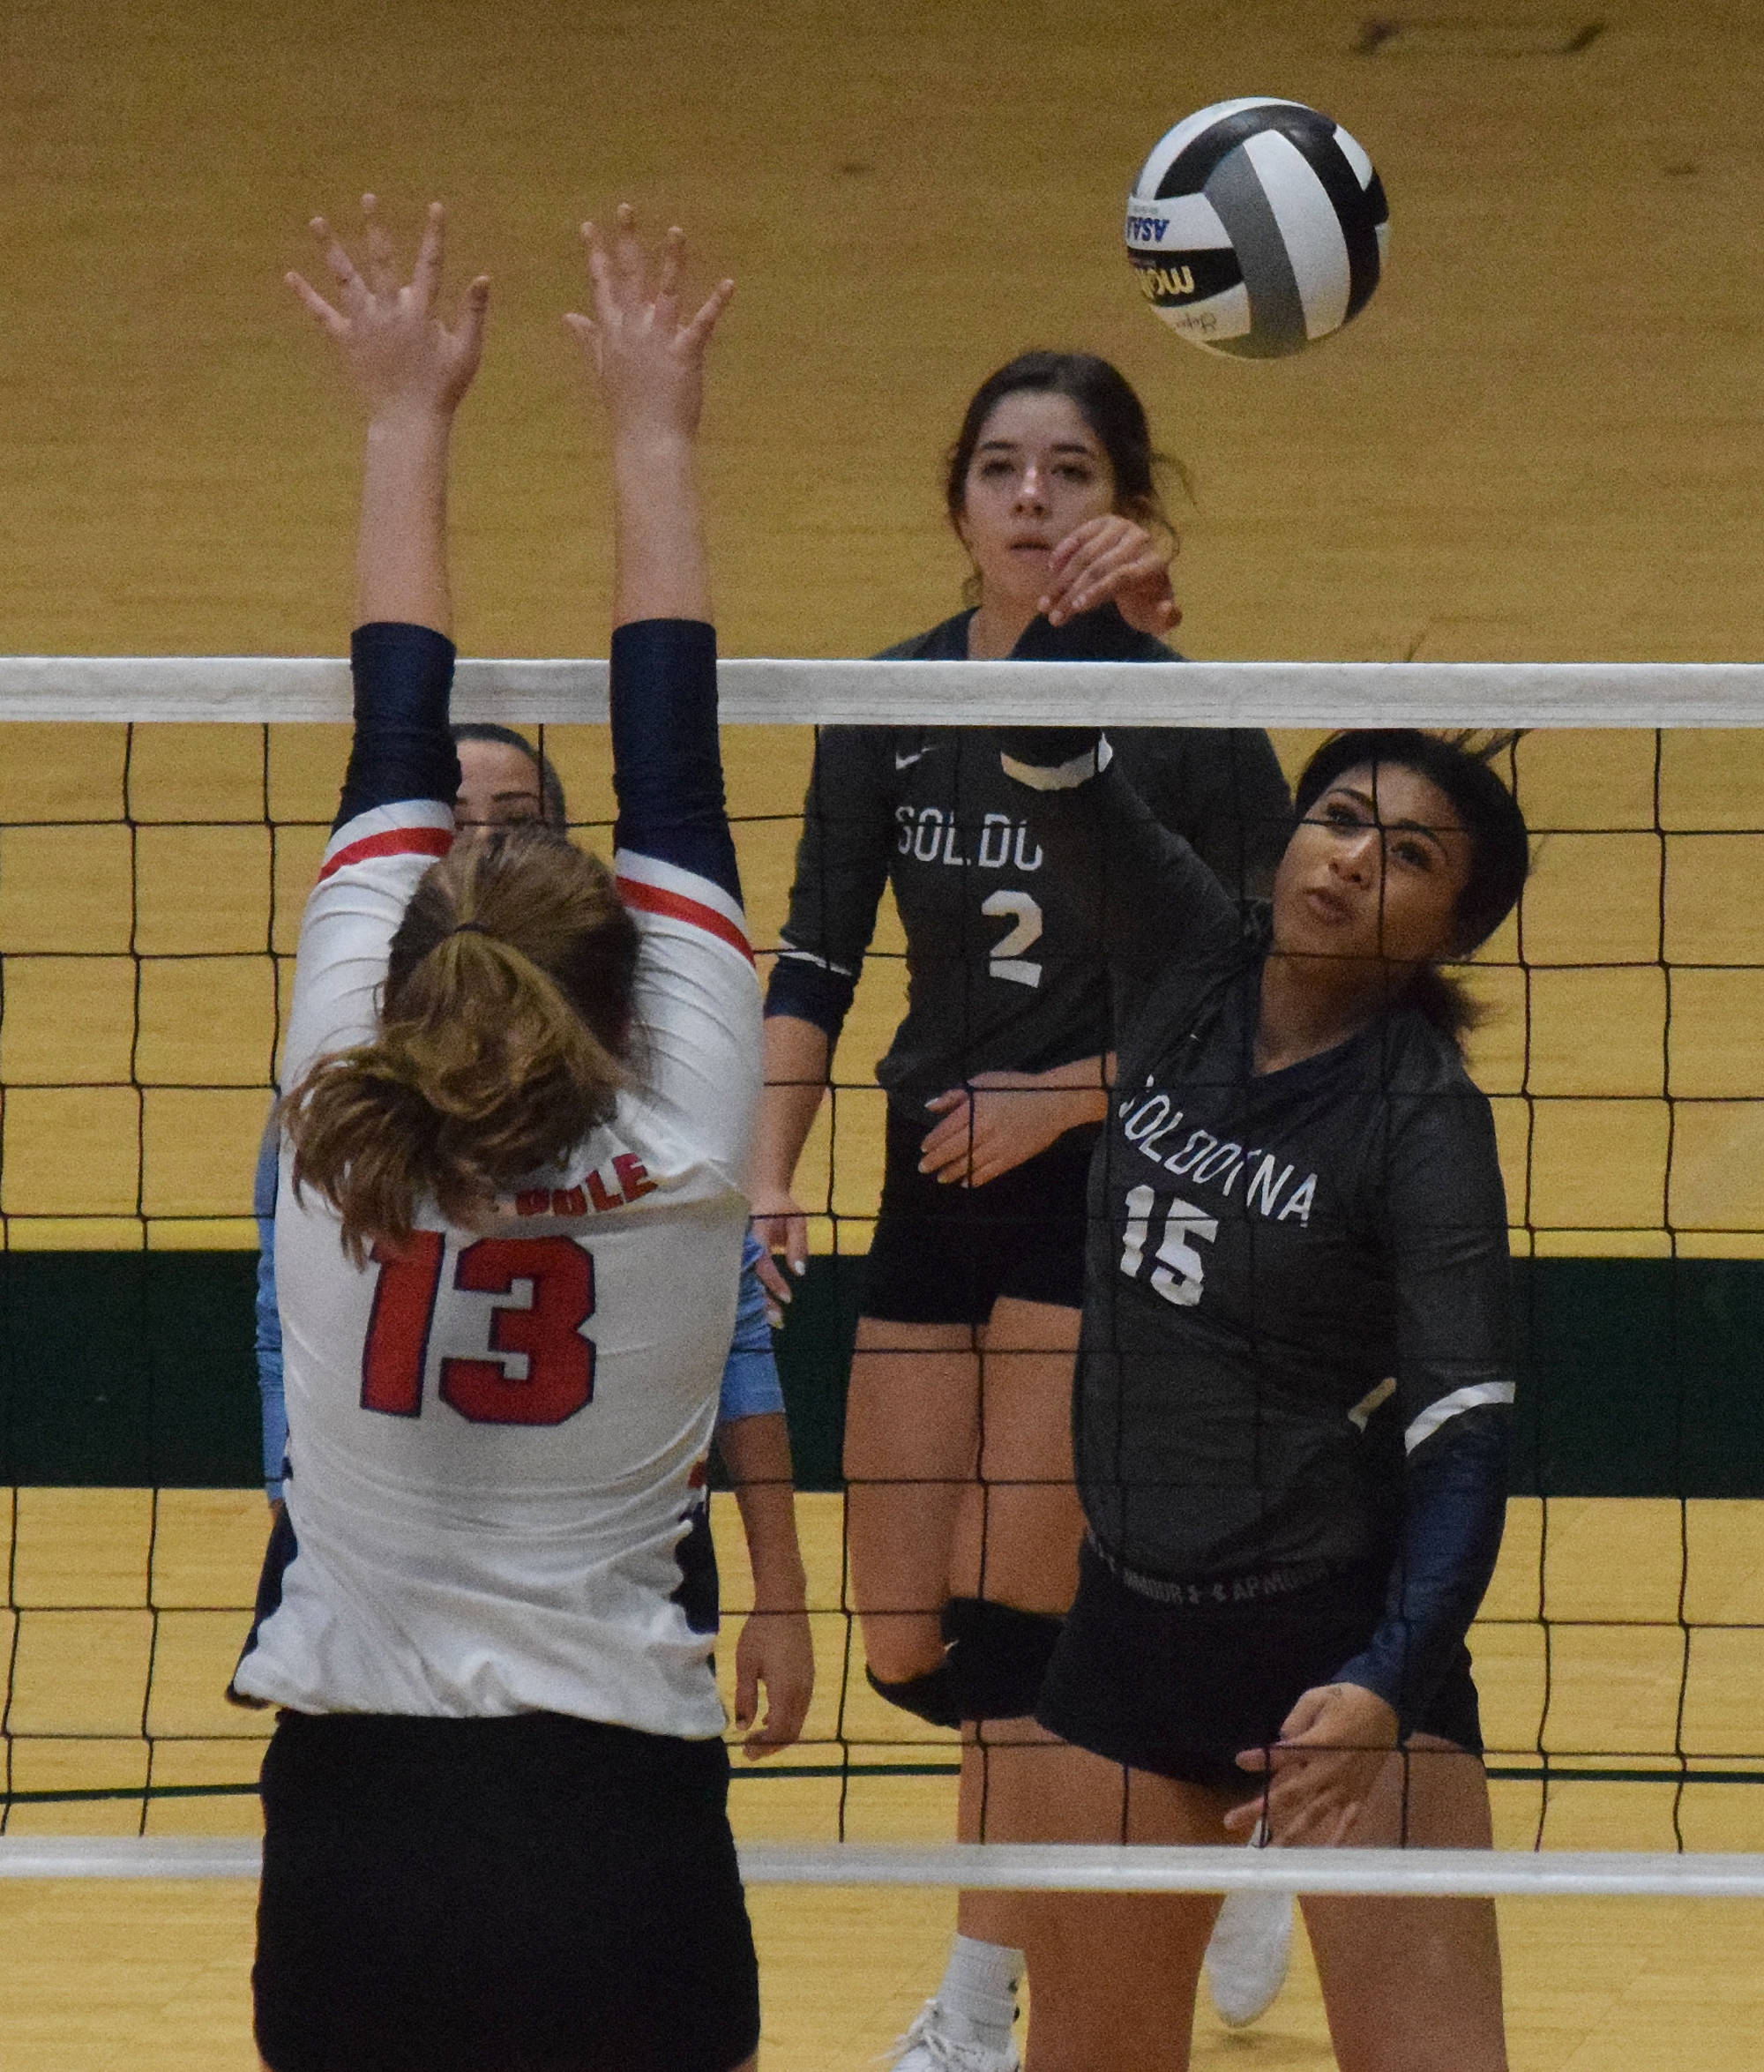 Soldotna’s Serena Foglia blasts a shot over North Pole blocker Madyson Conley, Friday, Nov. 15, 2019, at the Class 4A state volleyball tournament at the Alaska Airlines Center in Anchorage, Alaska. (Photo by Joey Klecka/Peninsula Clarion)